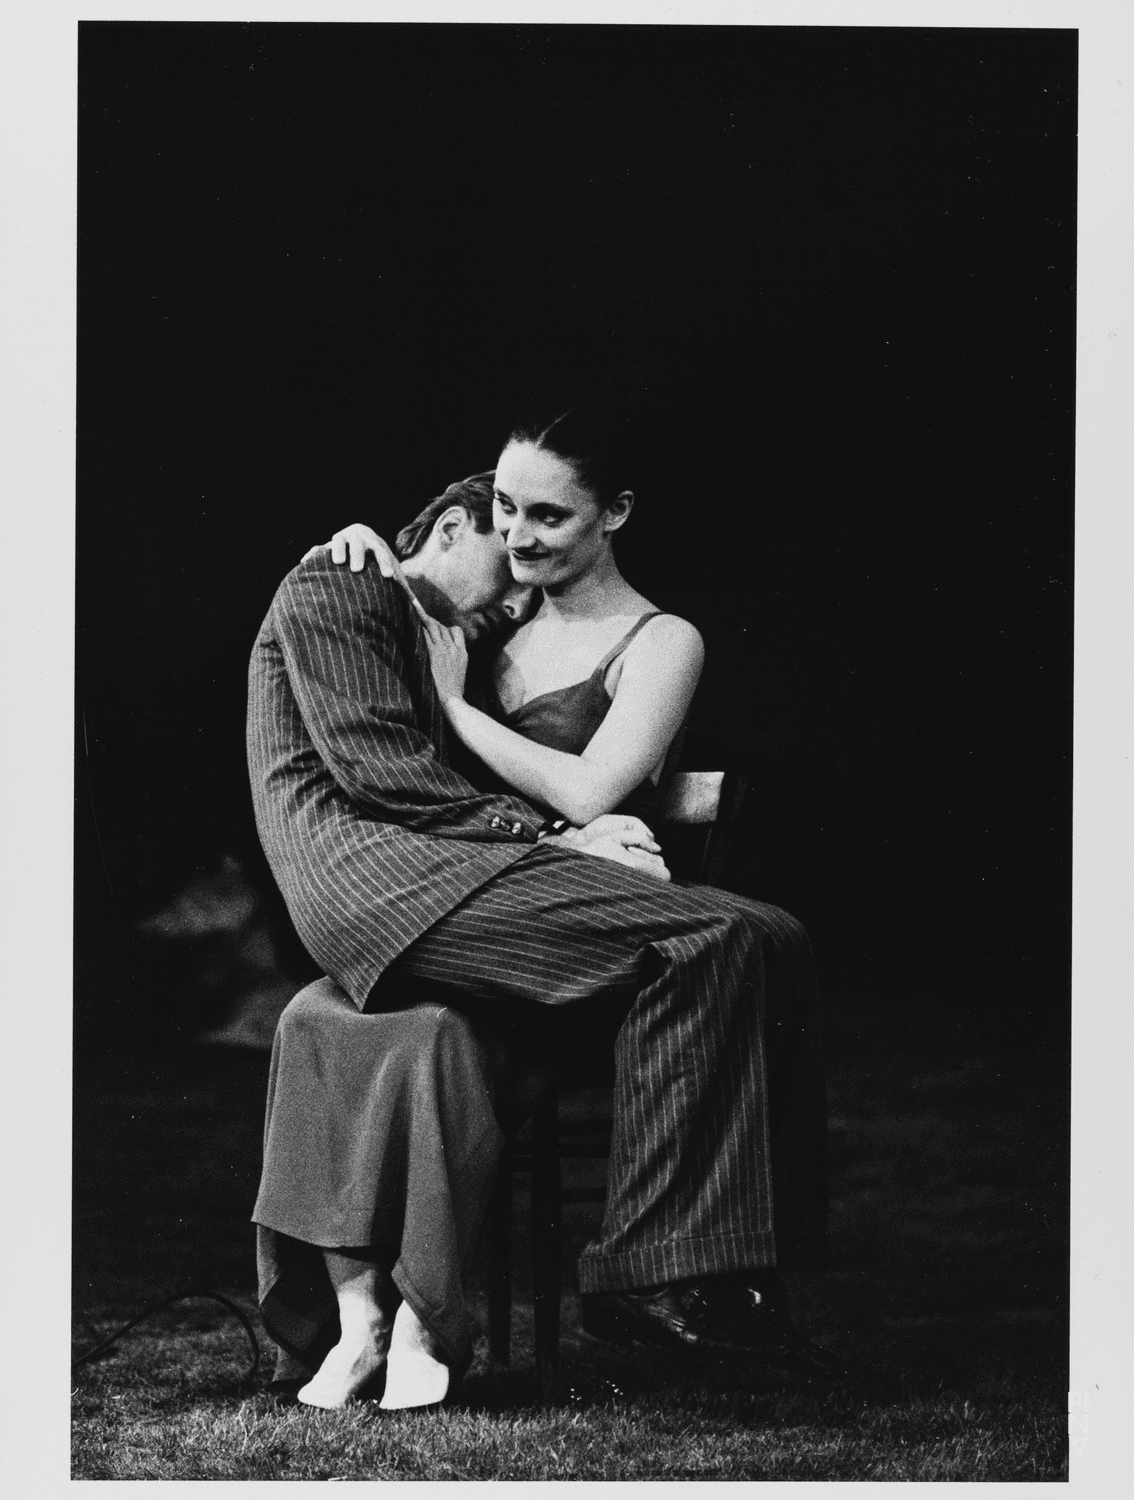 Dominique Mercy and Nazareth Panadero in “1980 – A Piece by Pina Bausch” by Pina Bausch